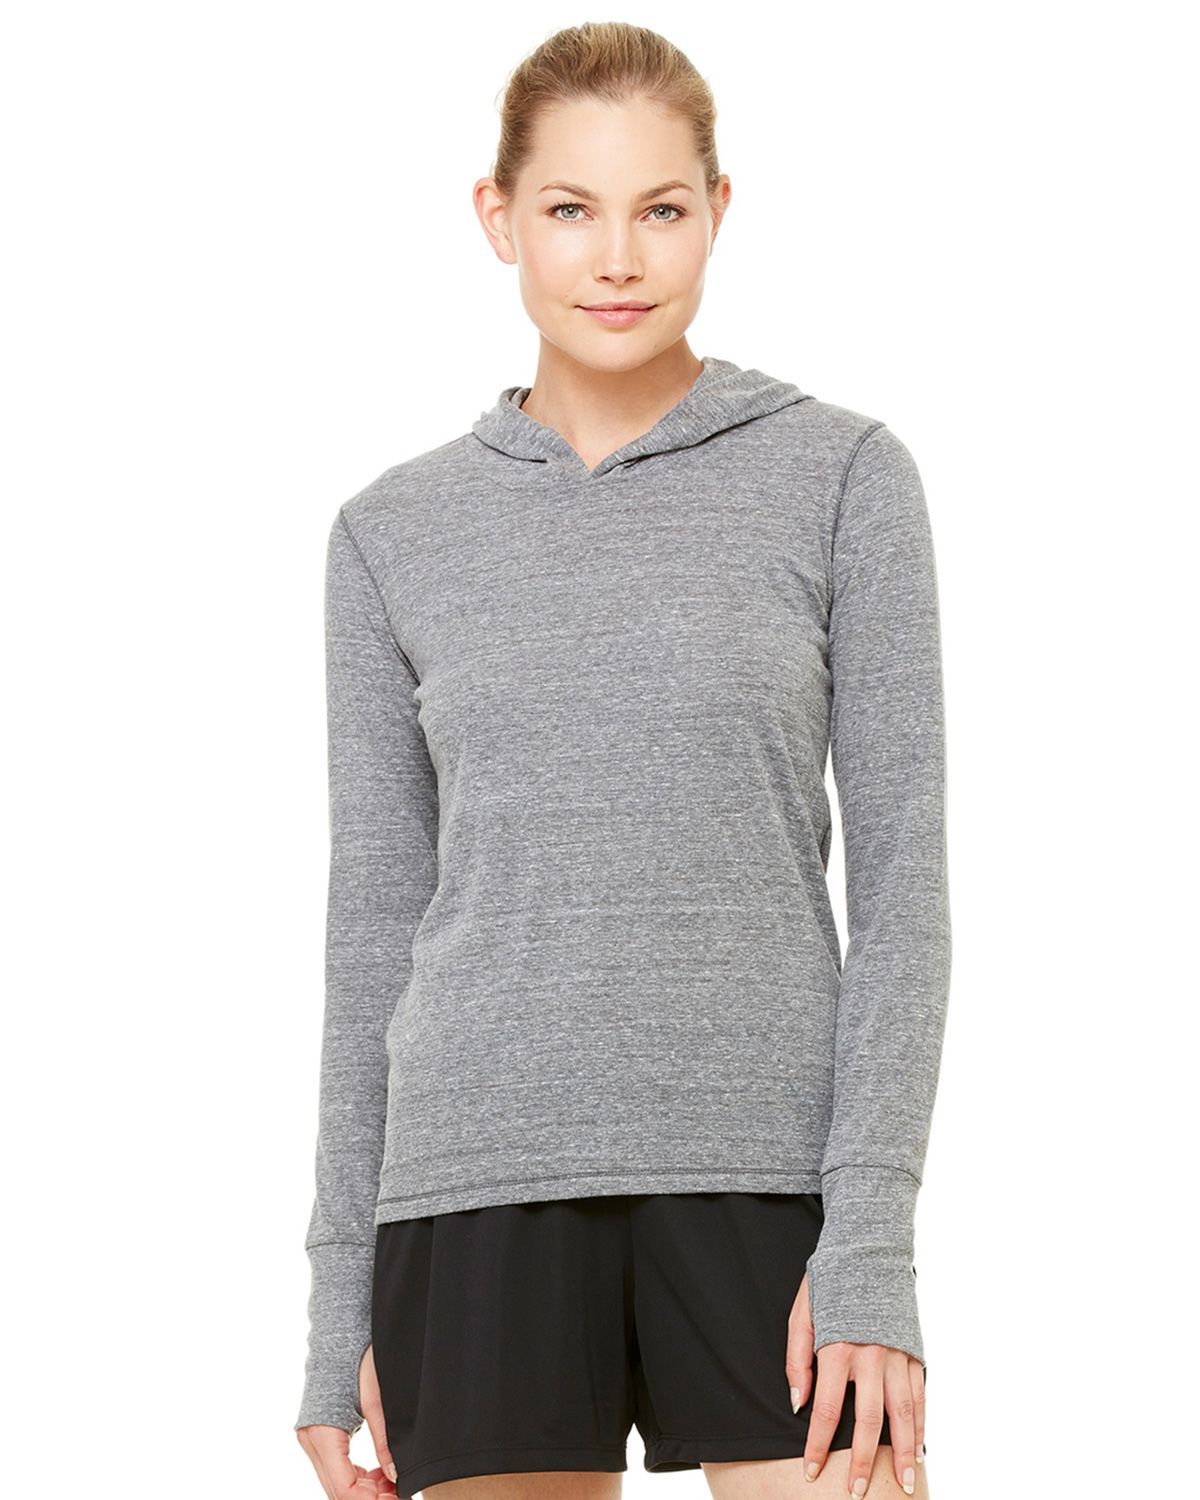 All Sport W3101 Women's Performance Triblend Long-Sleeve Hooded Pullover